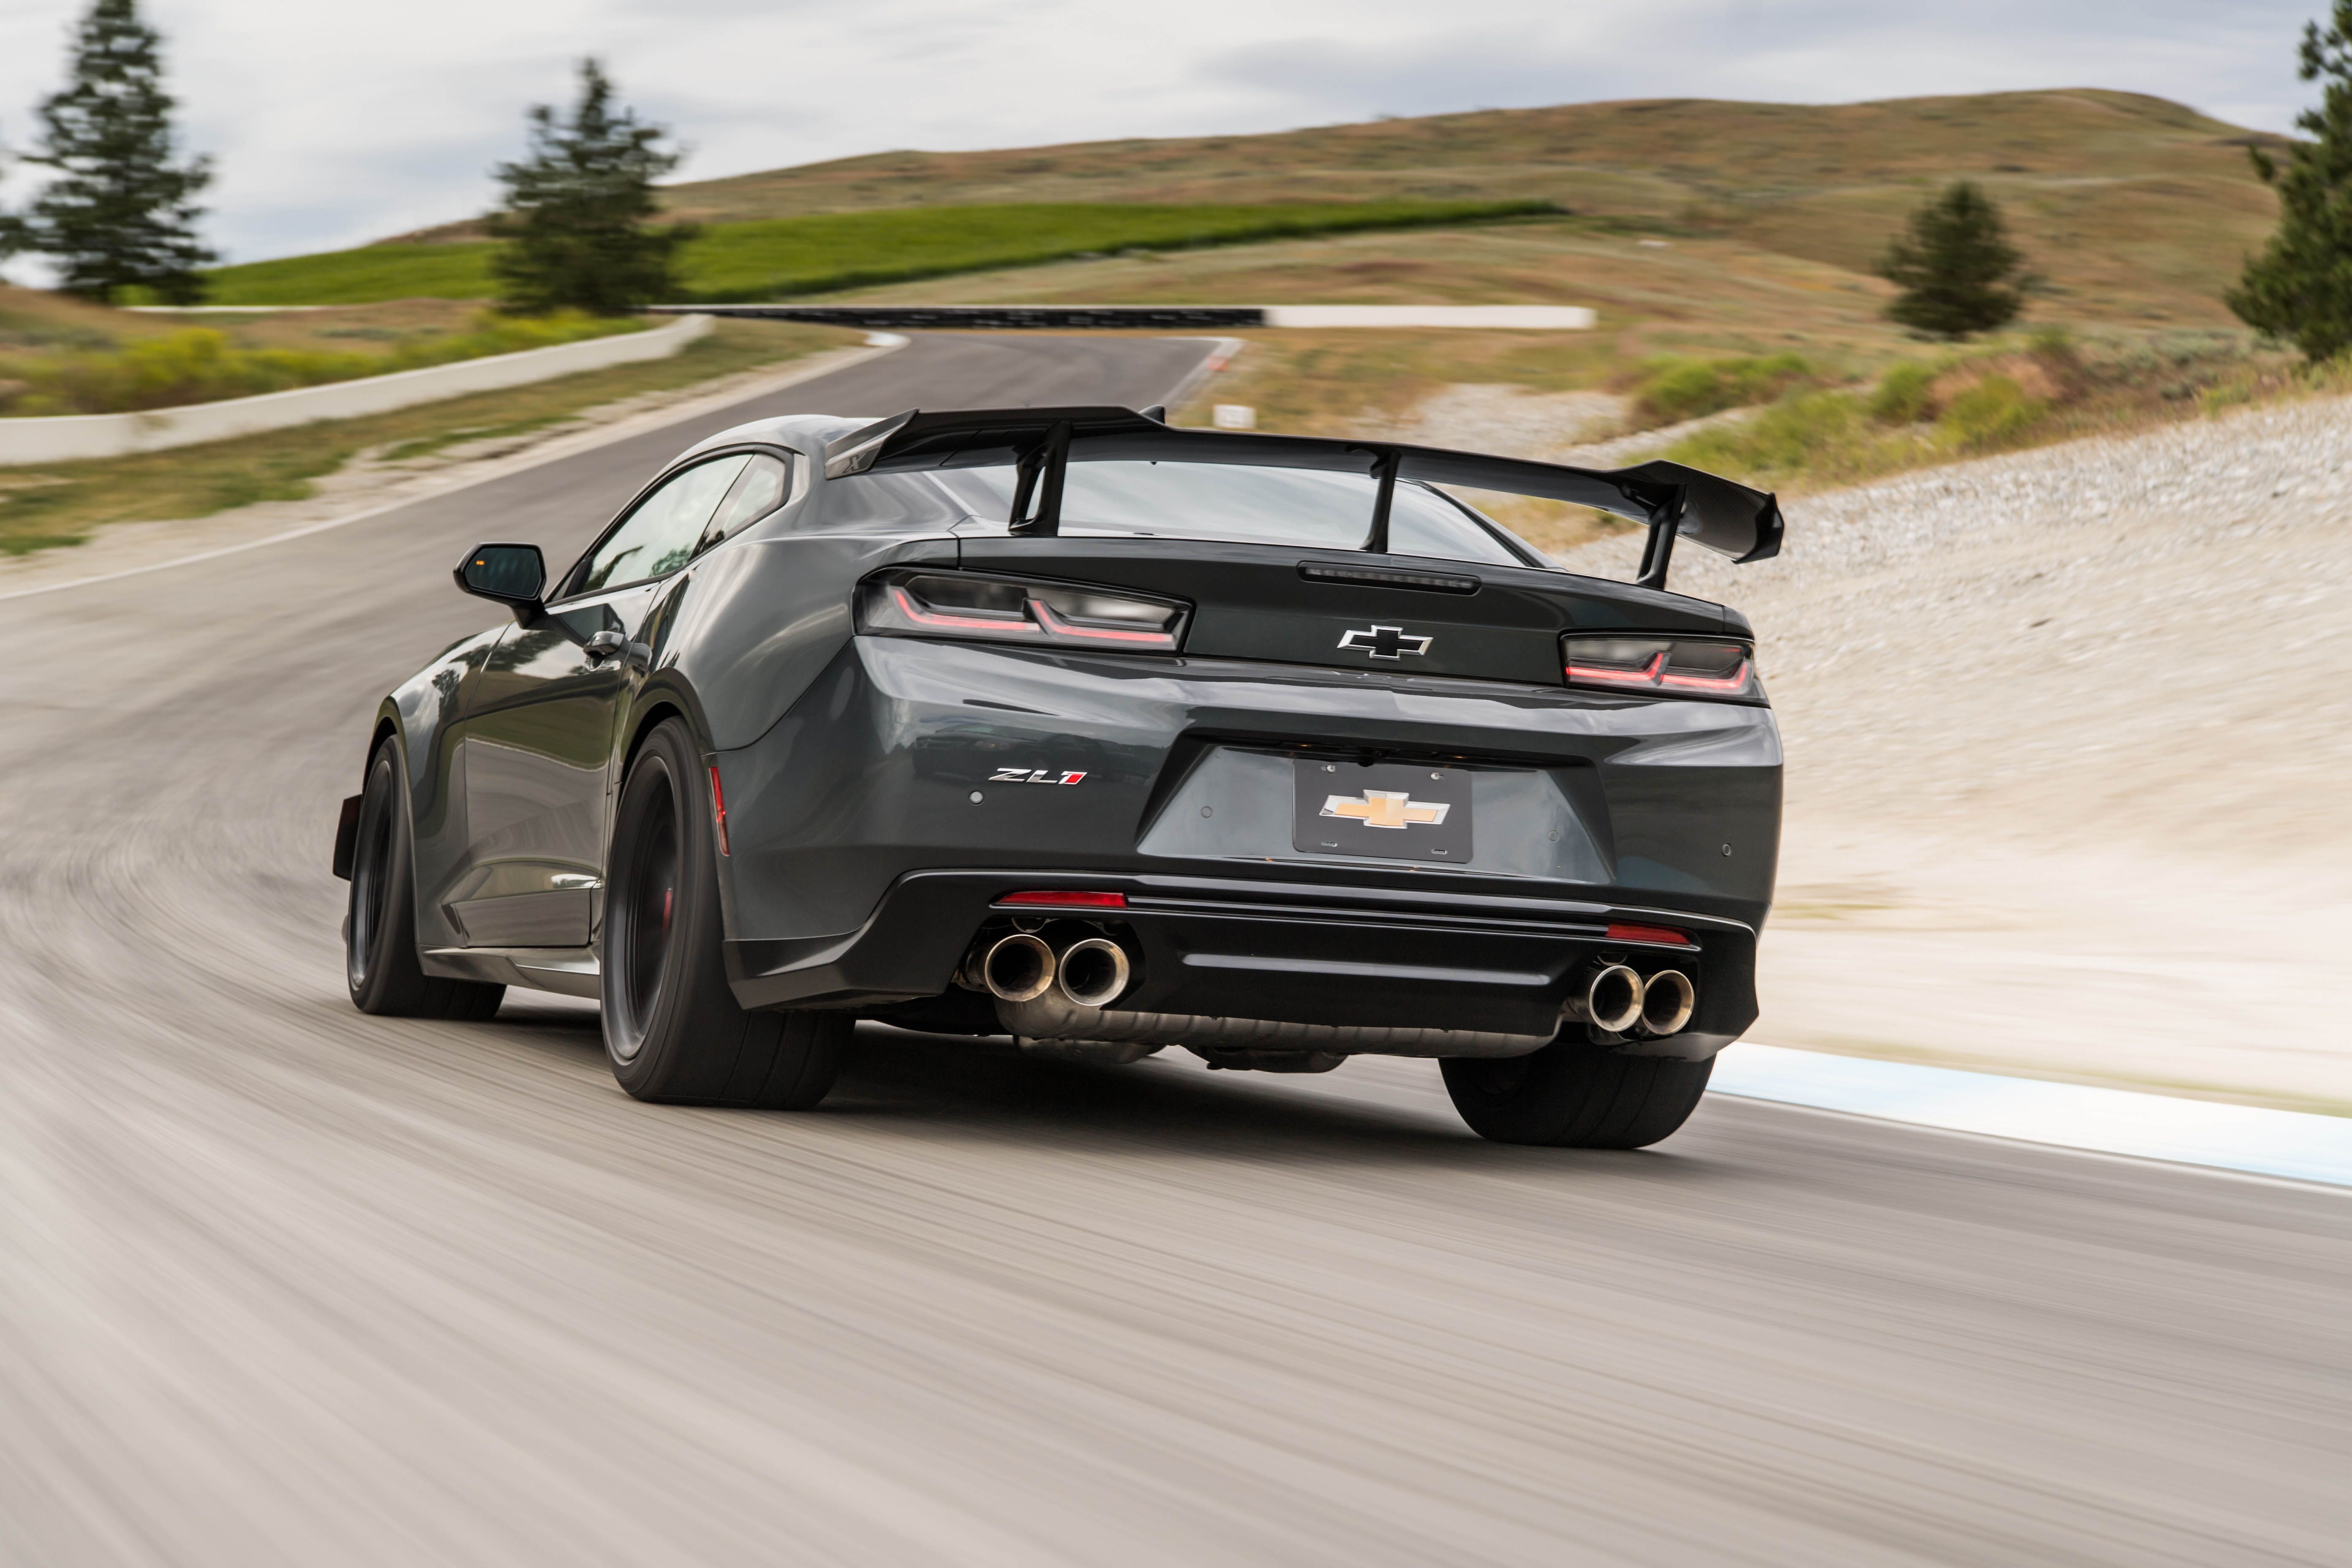 Chevrolet Camaro ZL1 1LE: First Drive